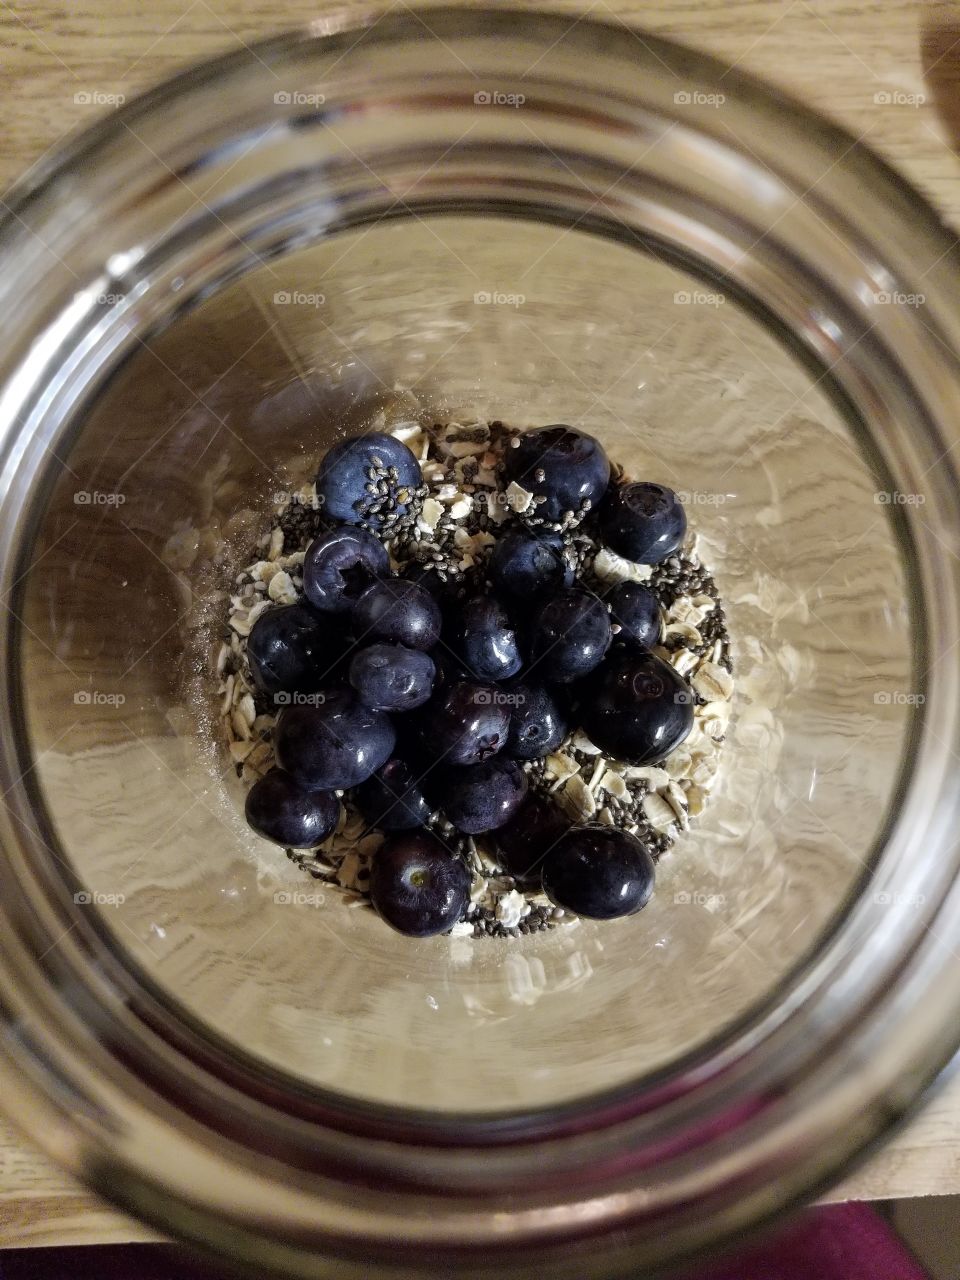 blueberries in a mason jar for breakfast with oats. overnight oats for a grab and go breakfast.